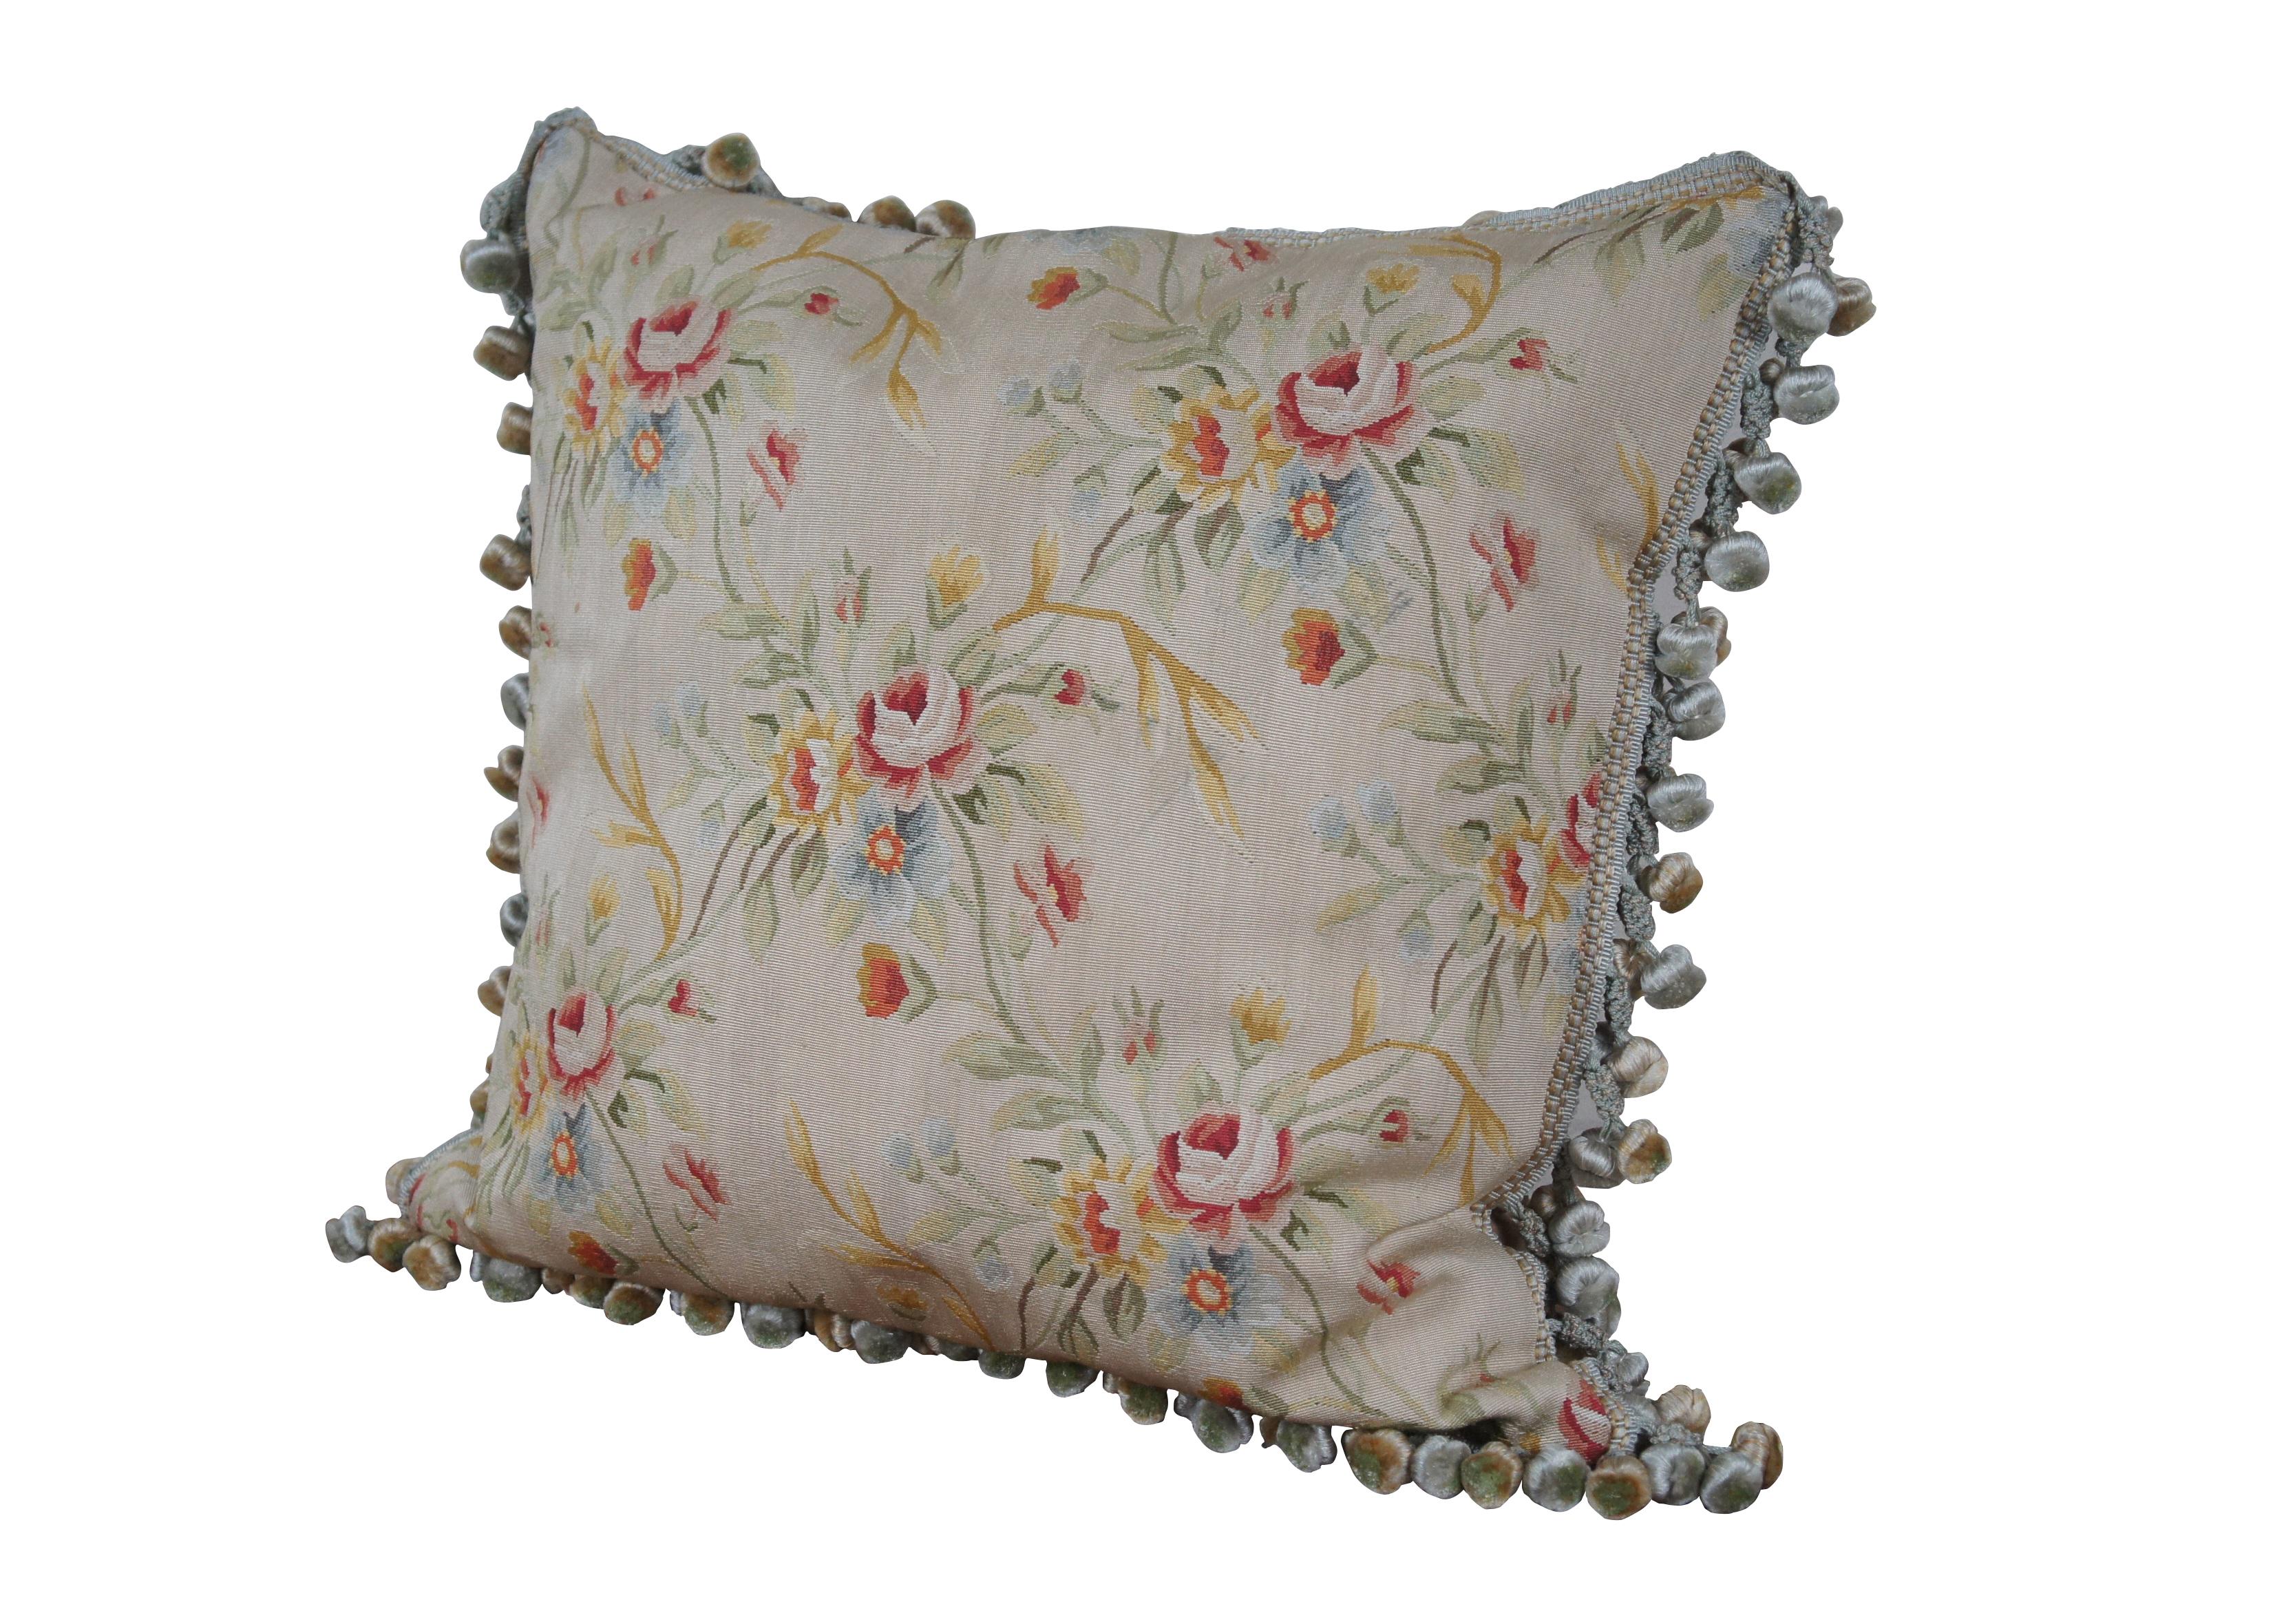 20th century square throw pillow, embroidered in silk with bouquets of pink, yellow, blue and orange flowers, connected with green and yellow stems. Down filled. Light brown velour back with zipper closure. Blue and gold ball tassel